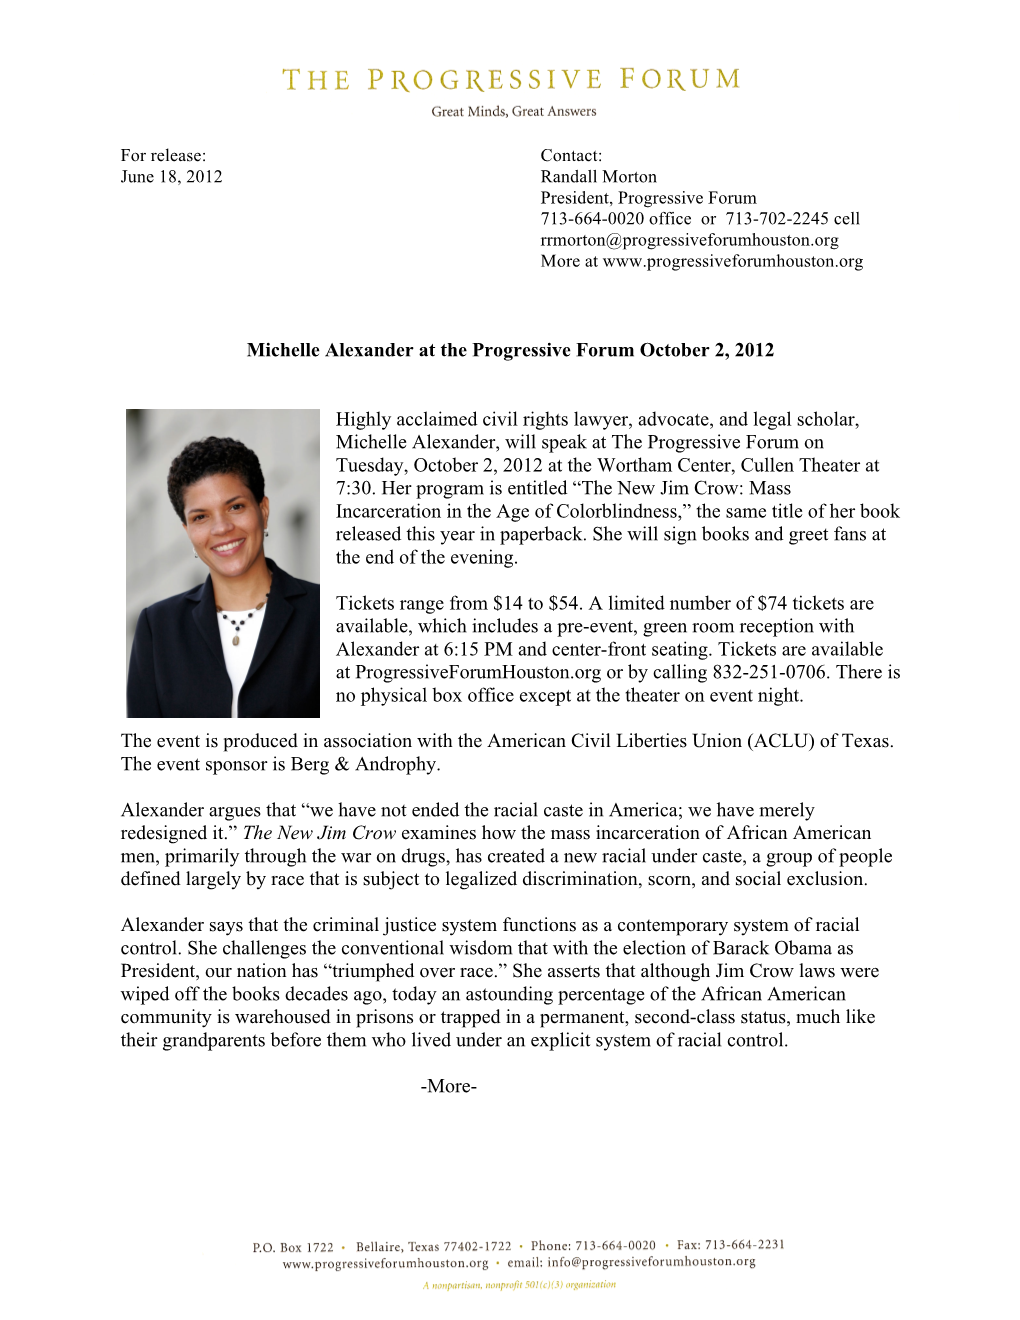 Michelle Alexander at the Progressive Forum October 2, 2012 Highly